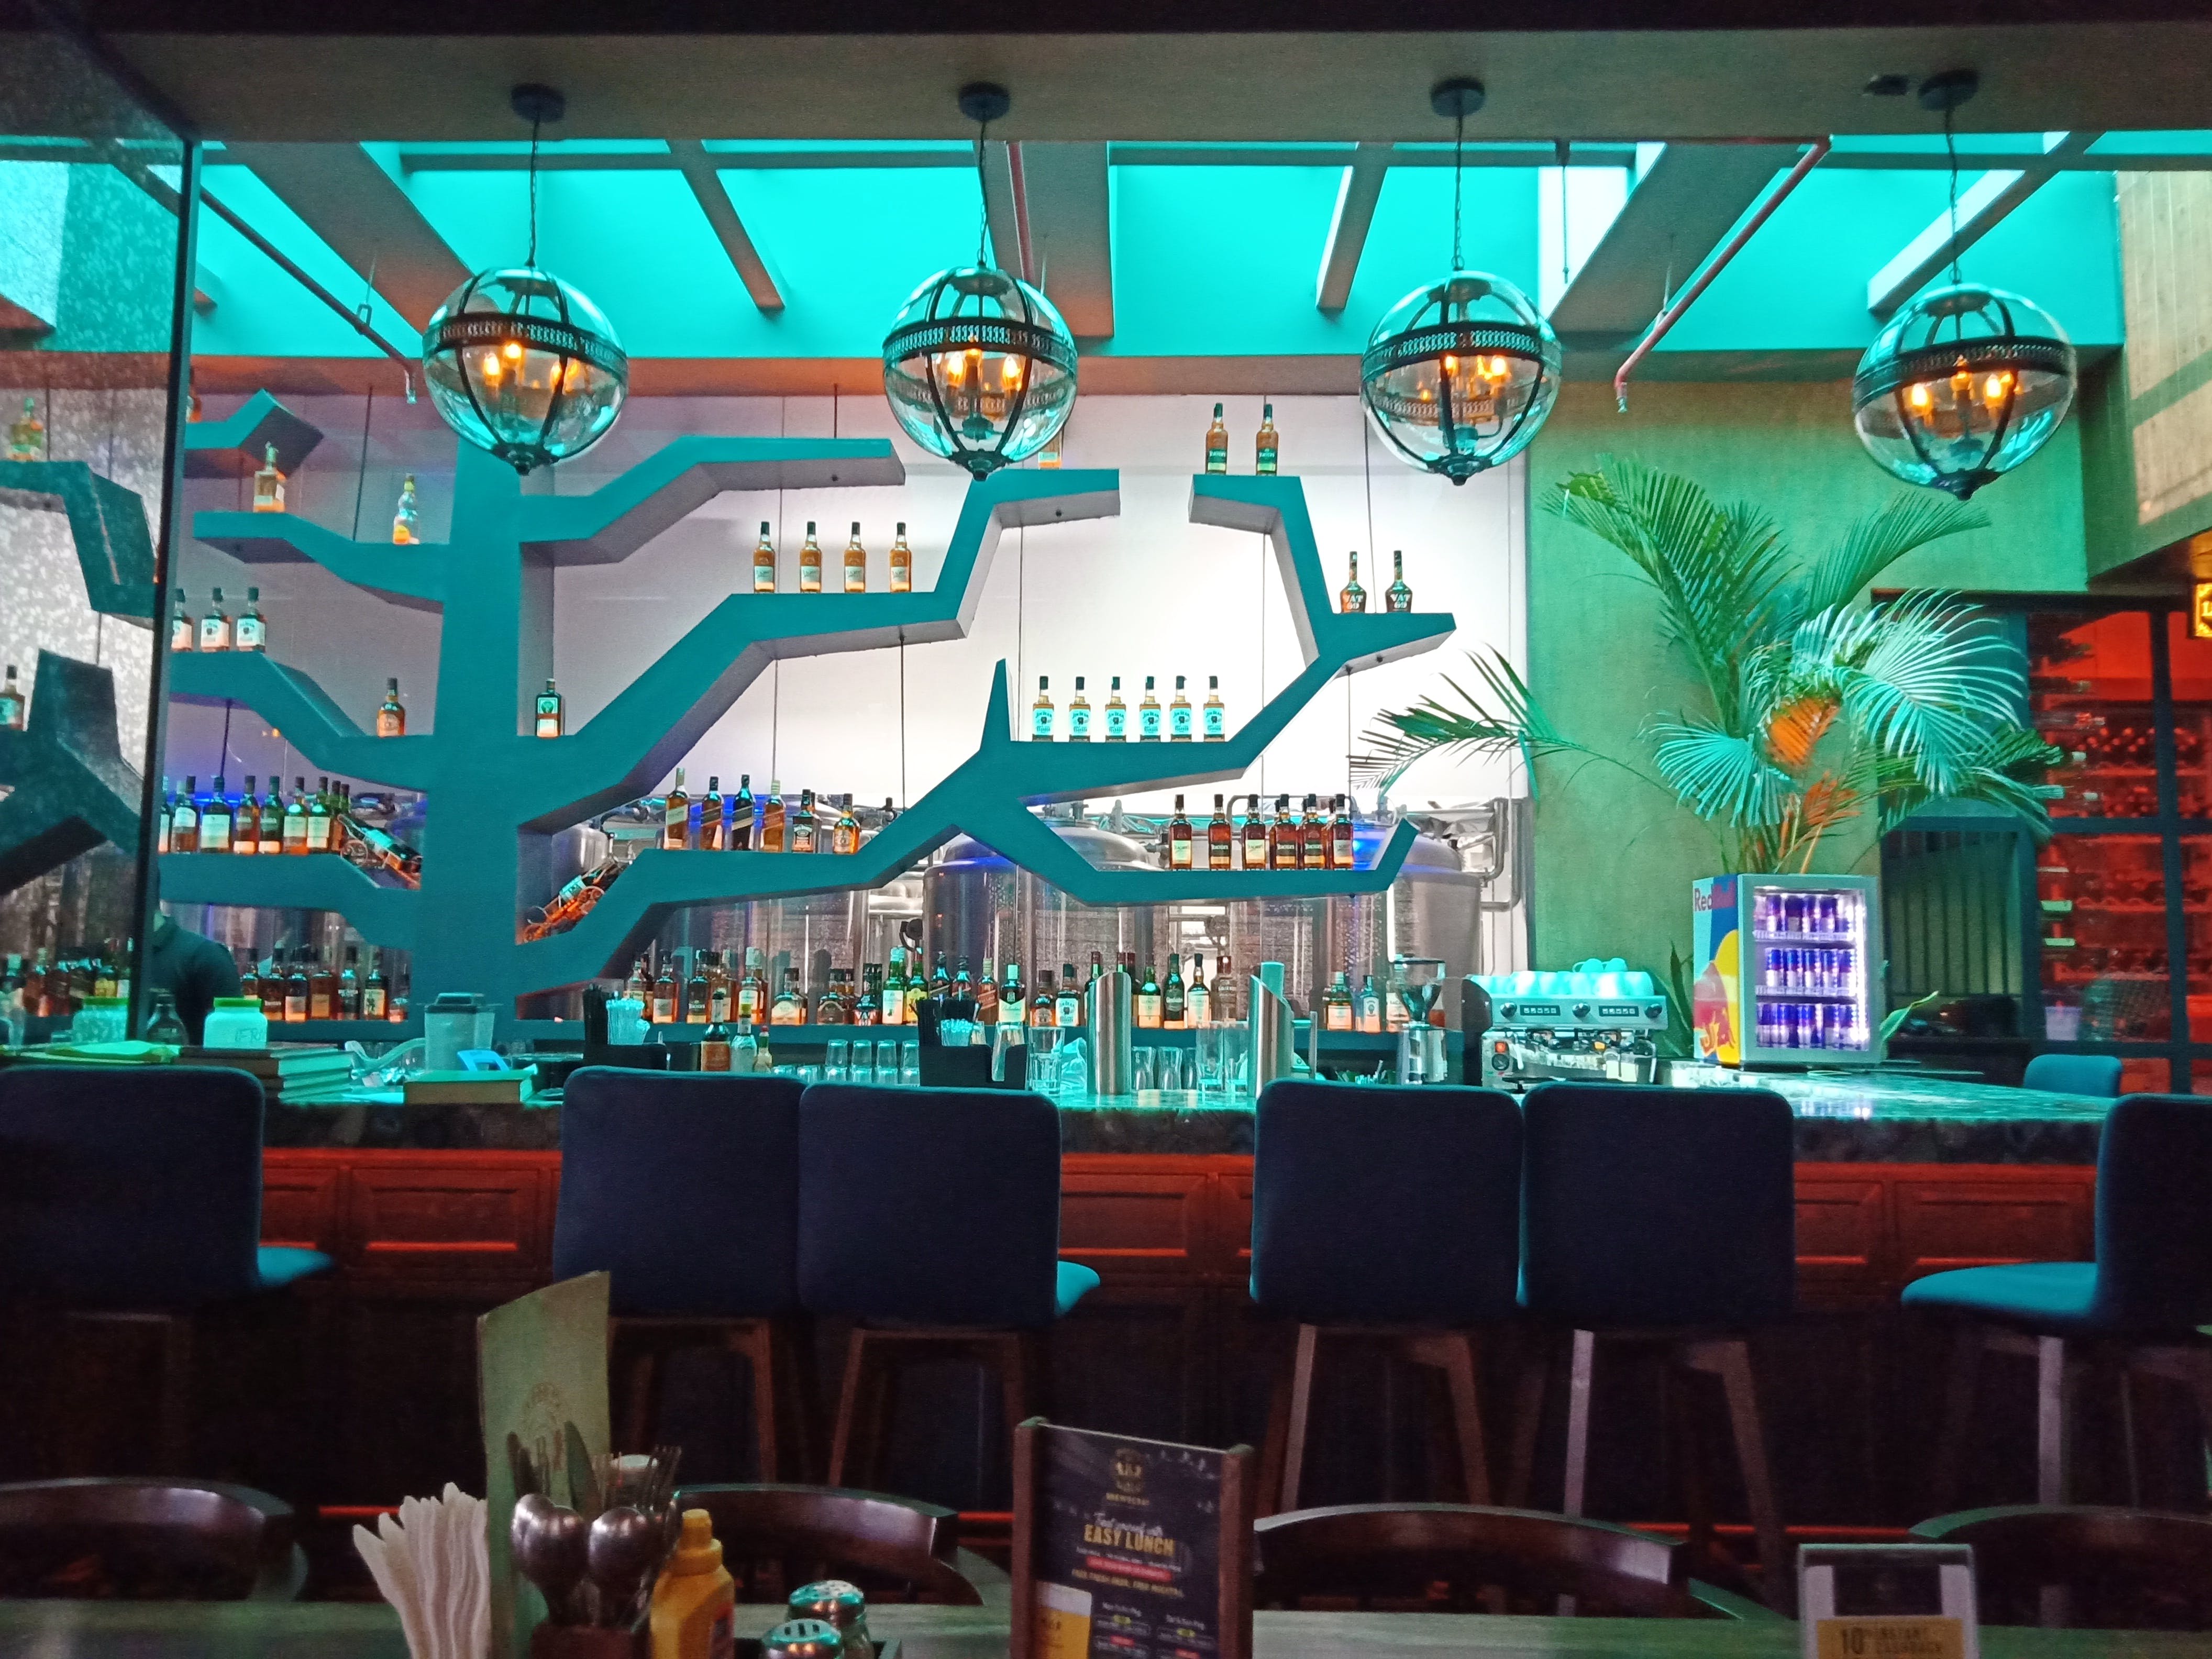 Turquoise,Restaurant,Bar,Room,Building,Interior design,Diner,Table,Leisure,Coffeehouse